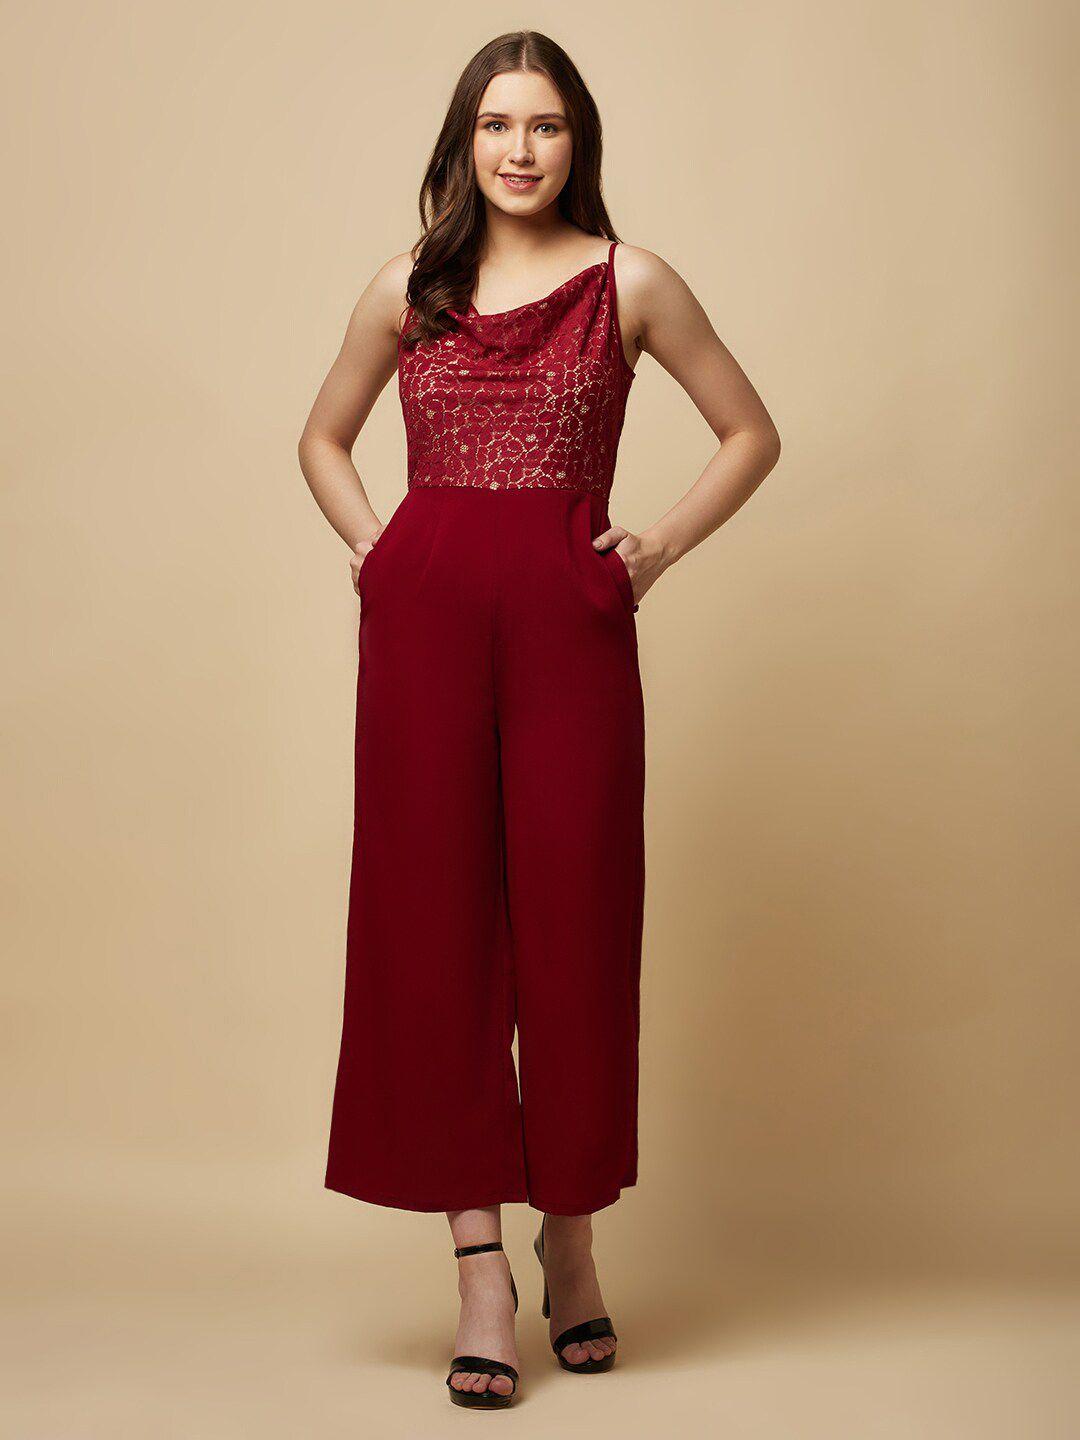 raassio cowl neck basic jumpsuit with lace inserts